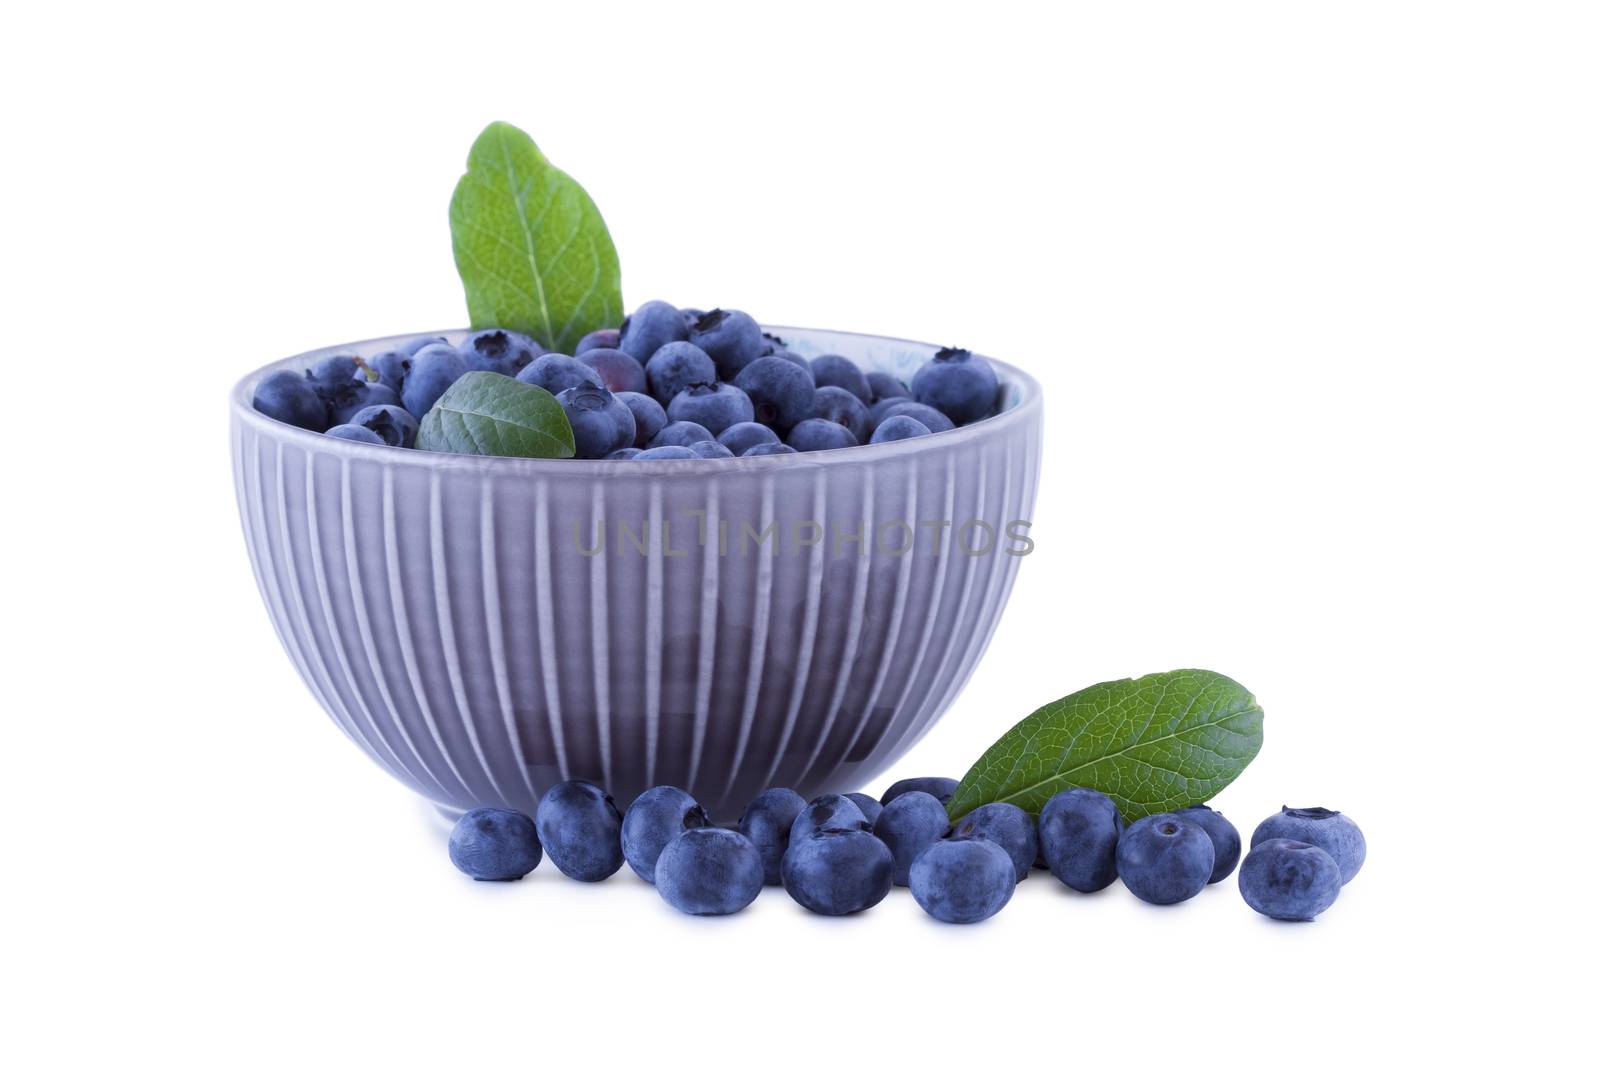 Blueberries in a porcelain bowl, fruits isolated on white background